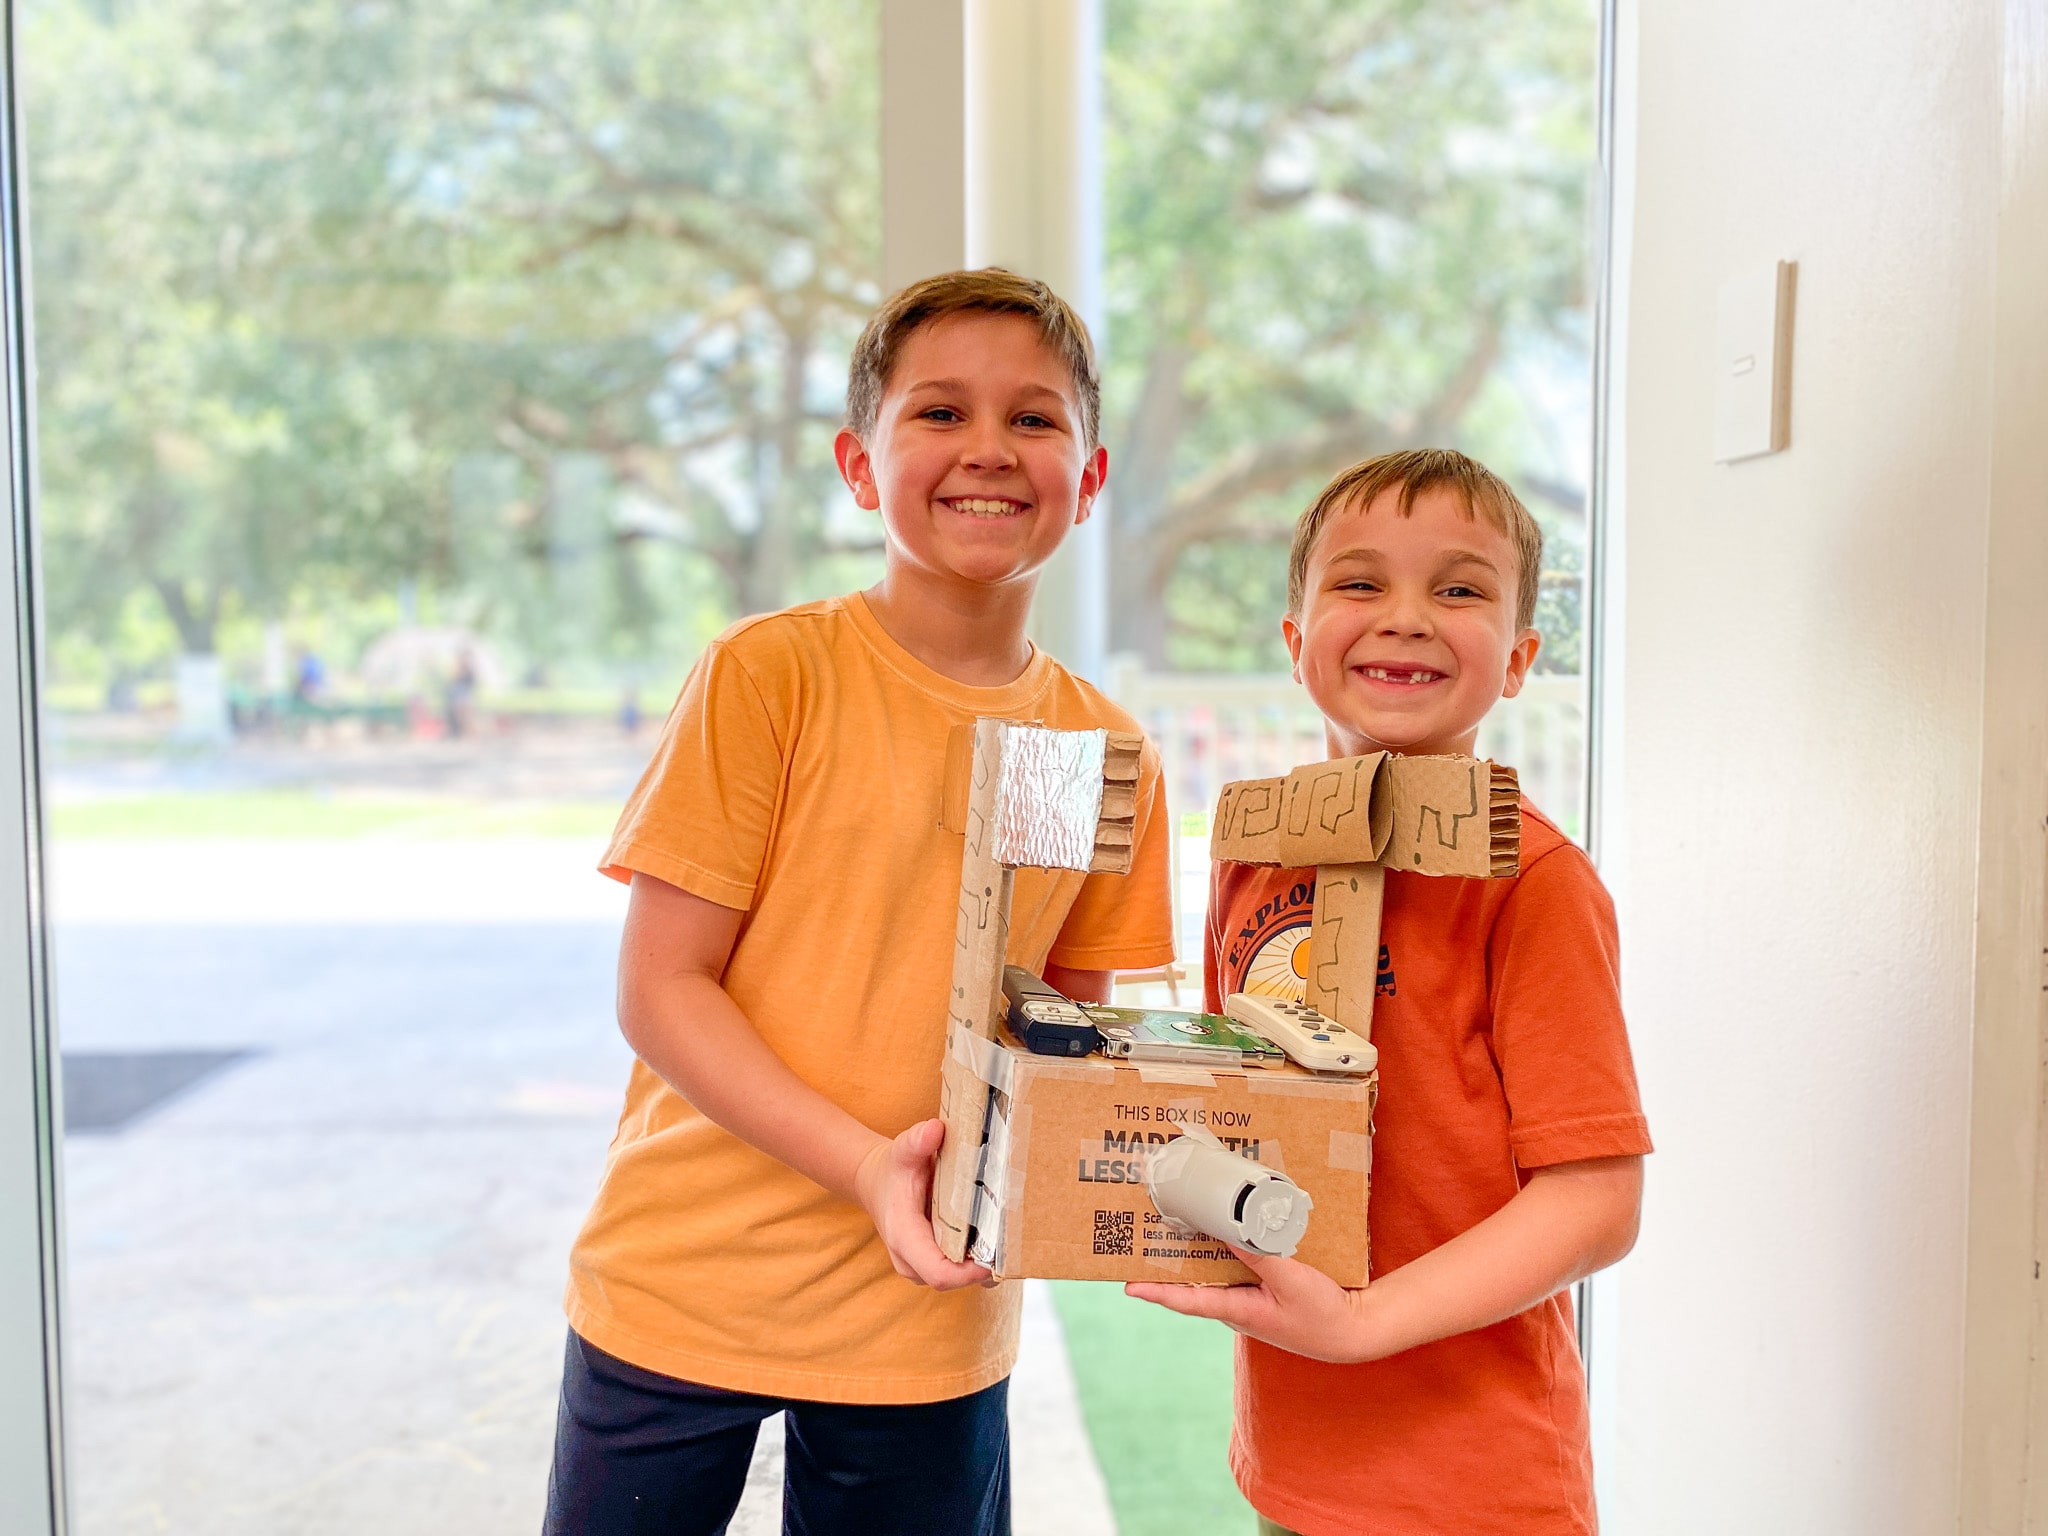 A boy and his little brother holding a castle made out of cardboard they constructed together.